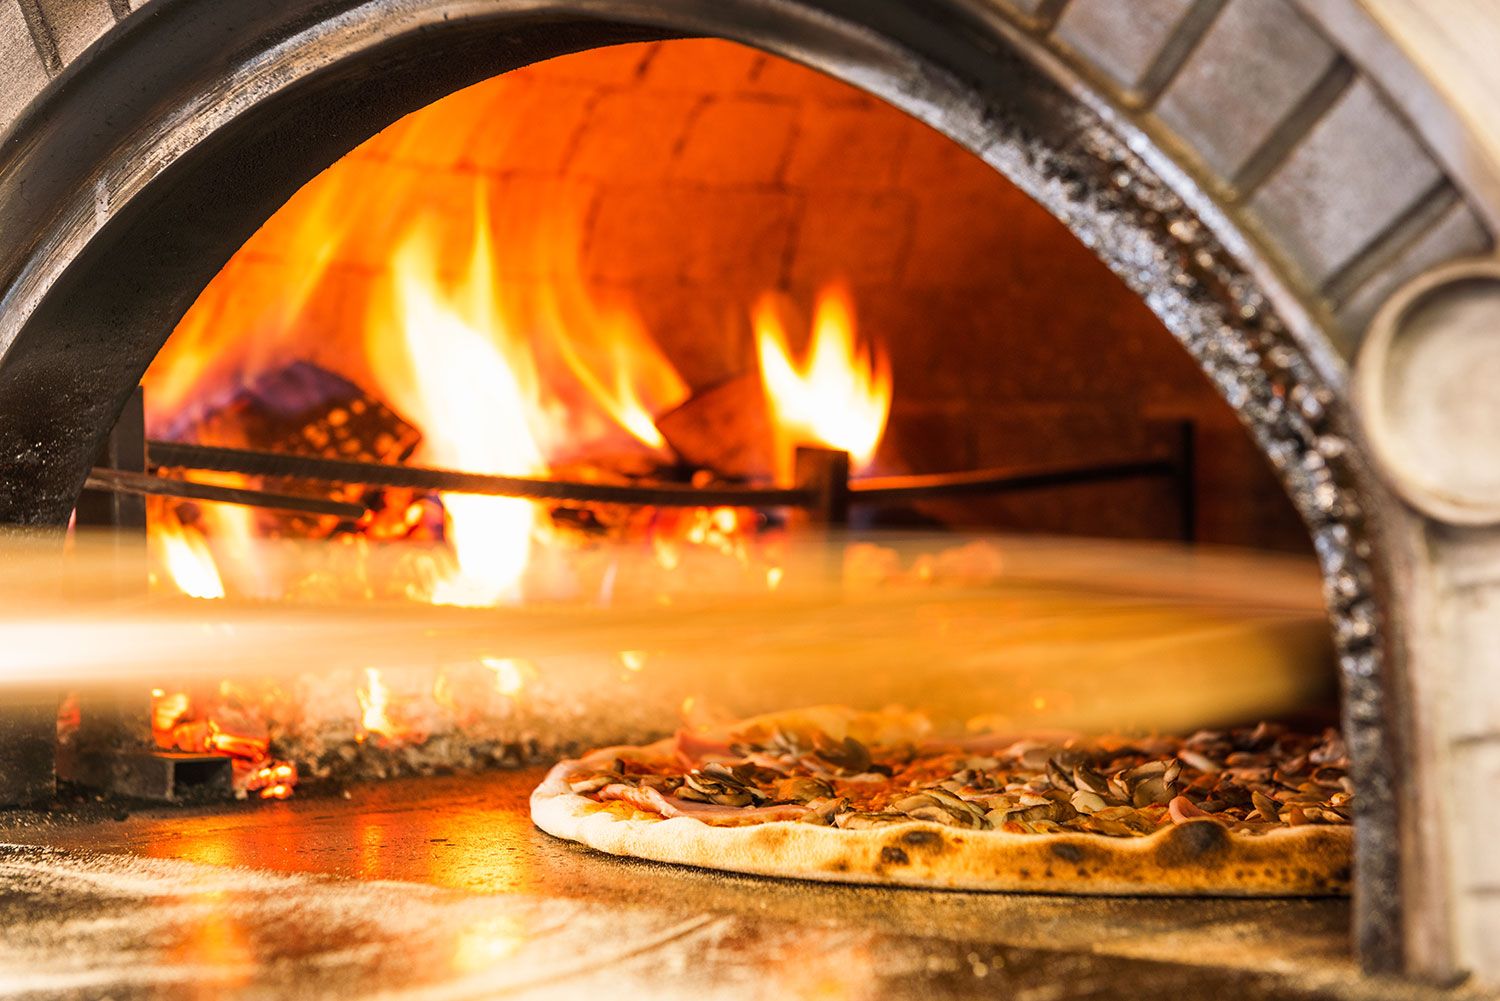 Making the pizza in a wood fired oven in Miami